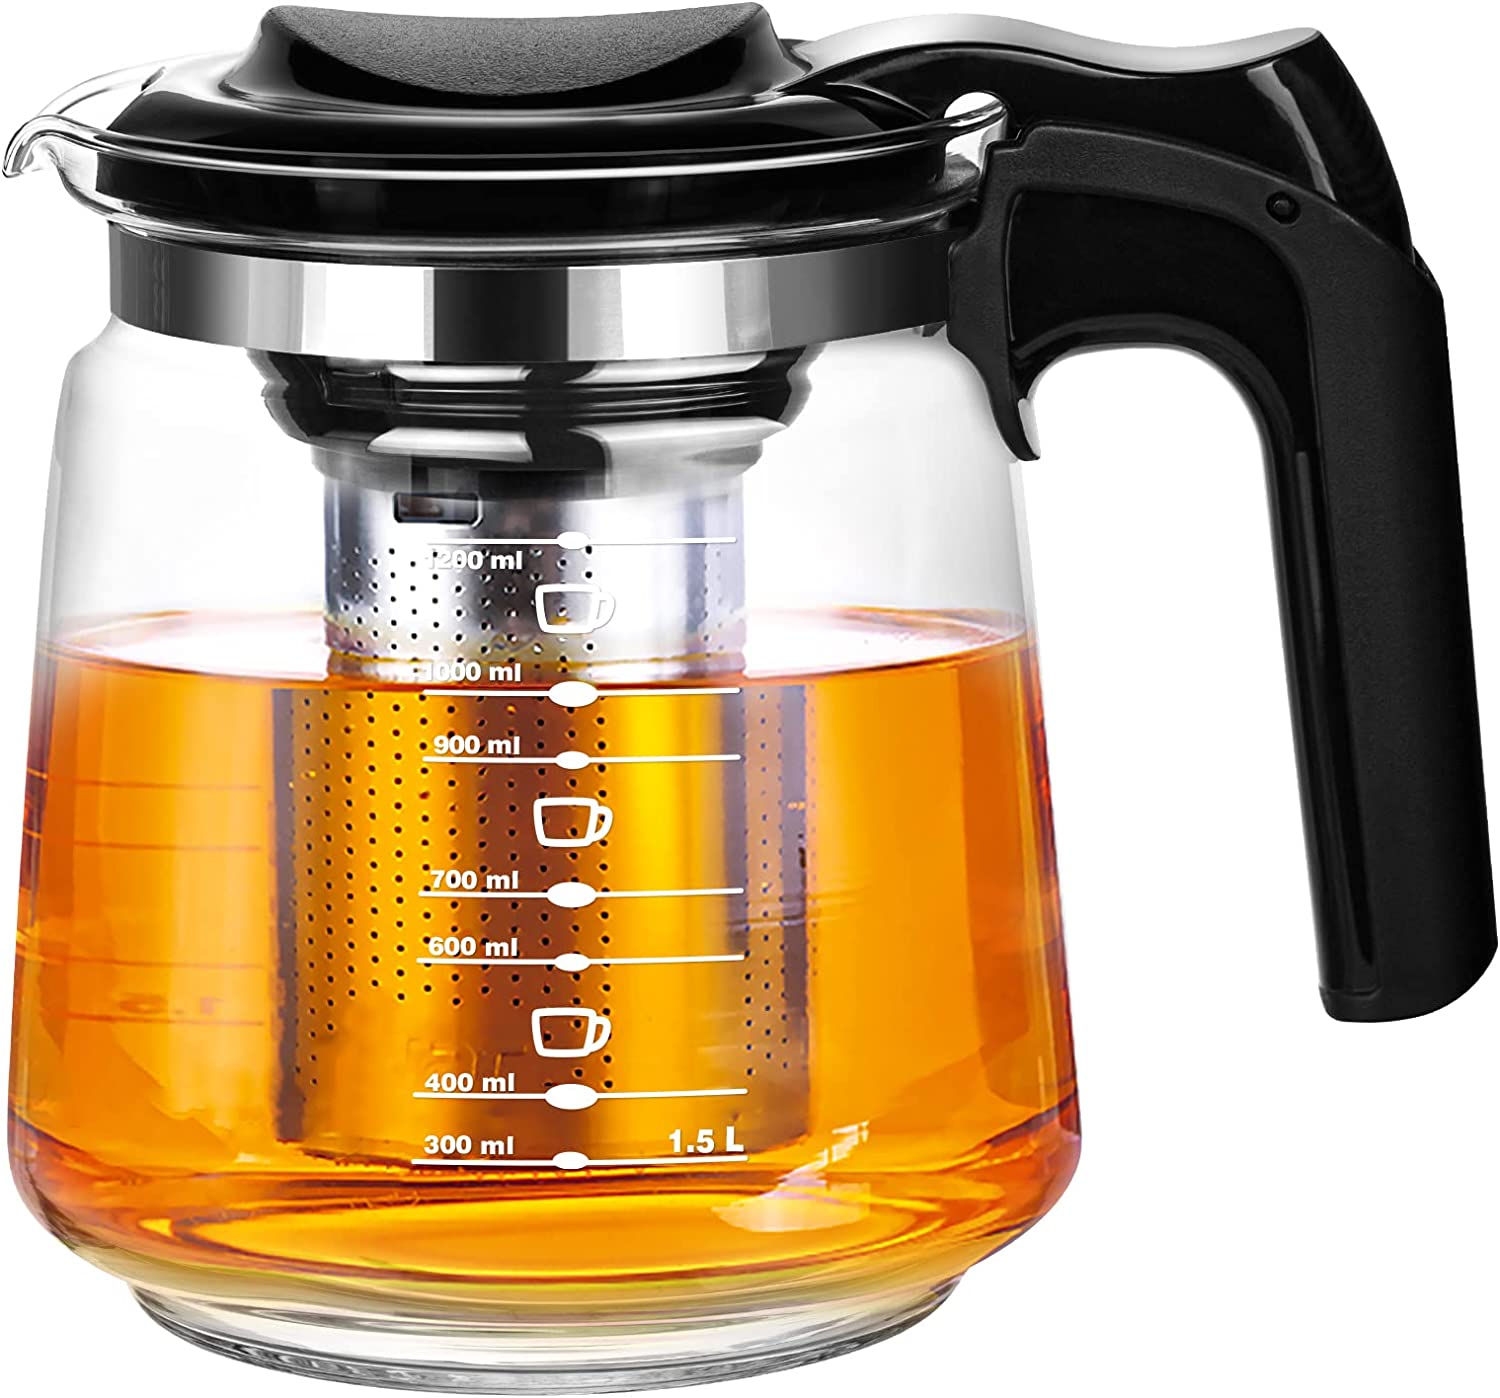 t24 Glass Teapot with Strainer Attachment, Heat-Resistant, Removable Stainless Steel Filter, Tea Strainer (1500 ml)